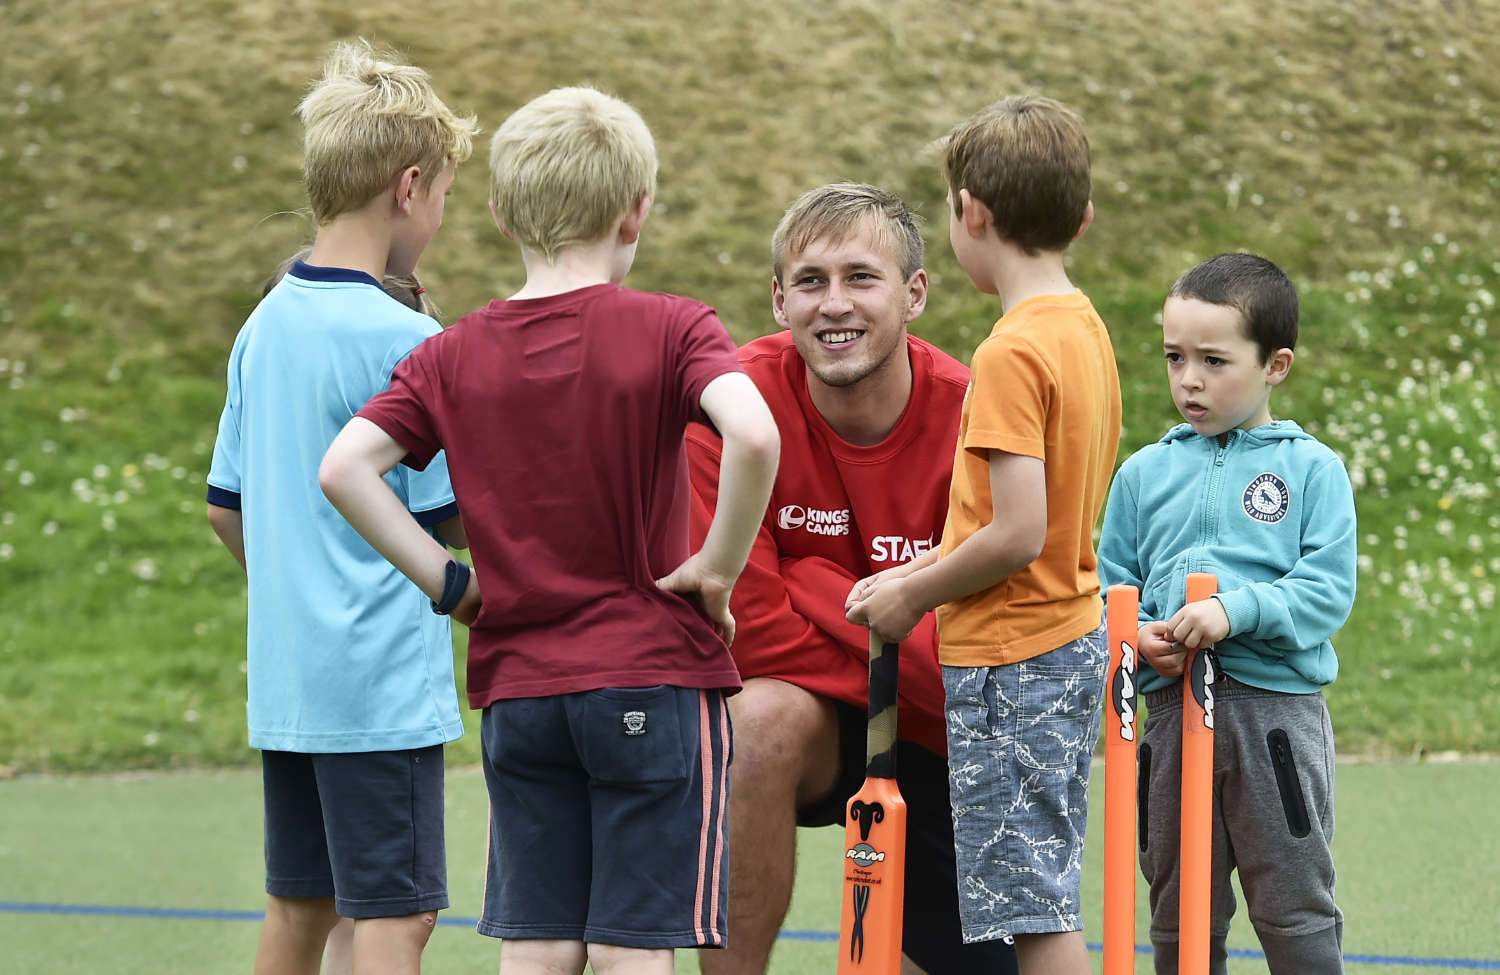 Cricket coaching in School Holidays